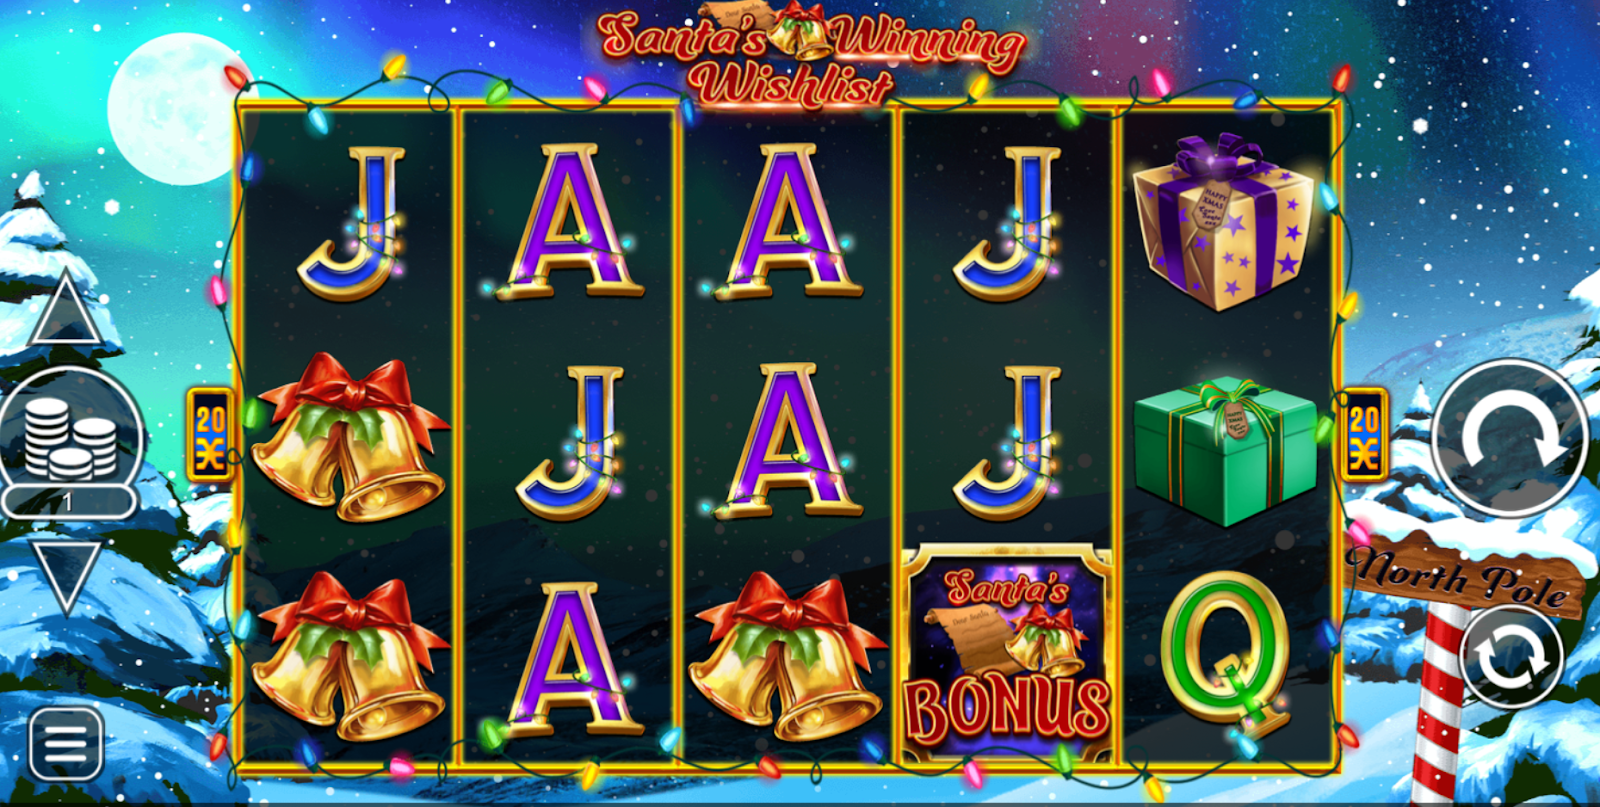 A screenshot of a slot game with icons such as bells, letters and gift boxes.